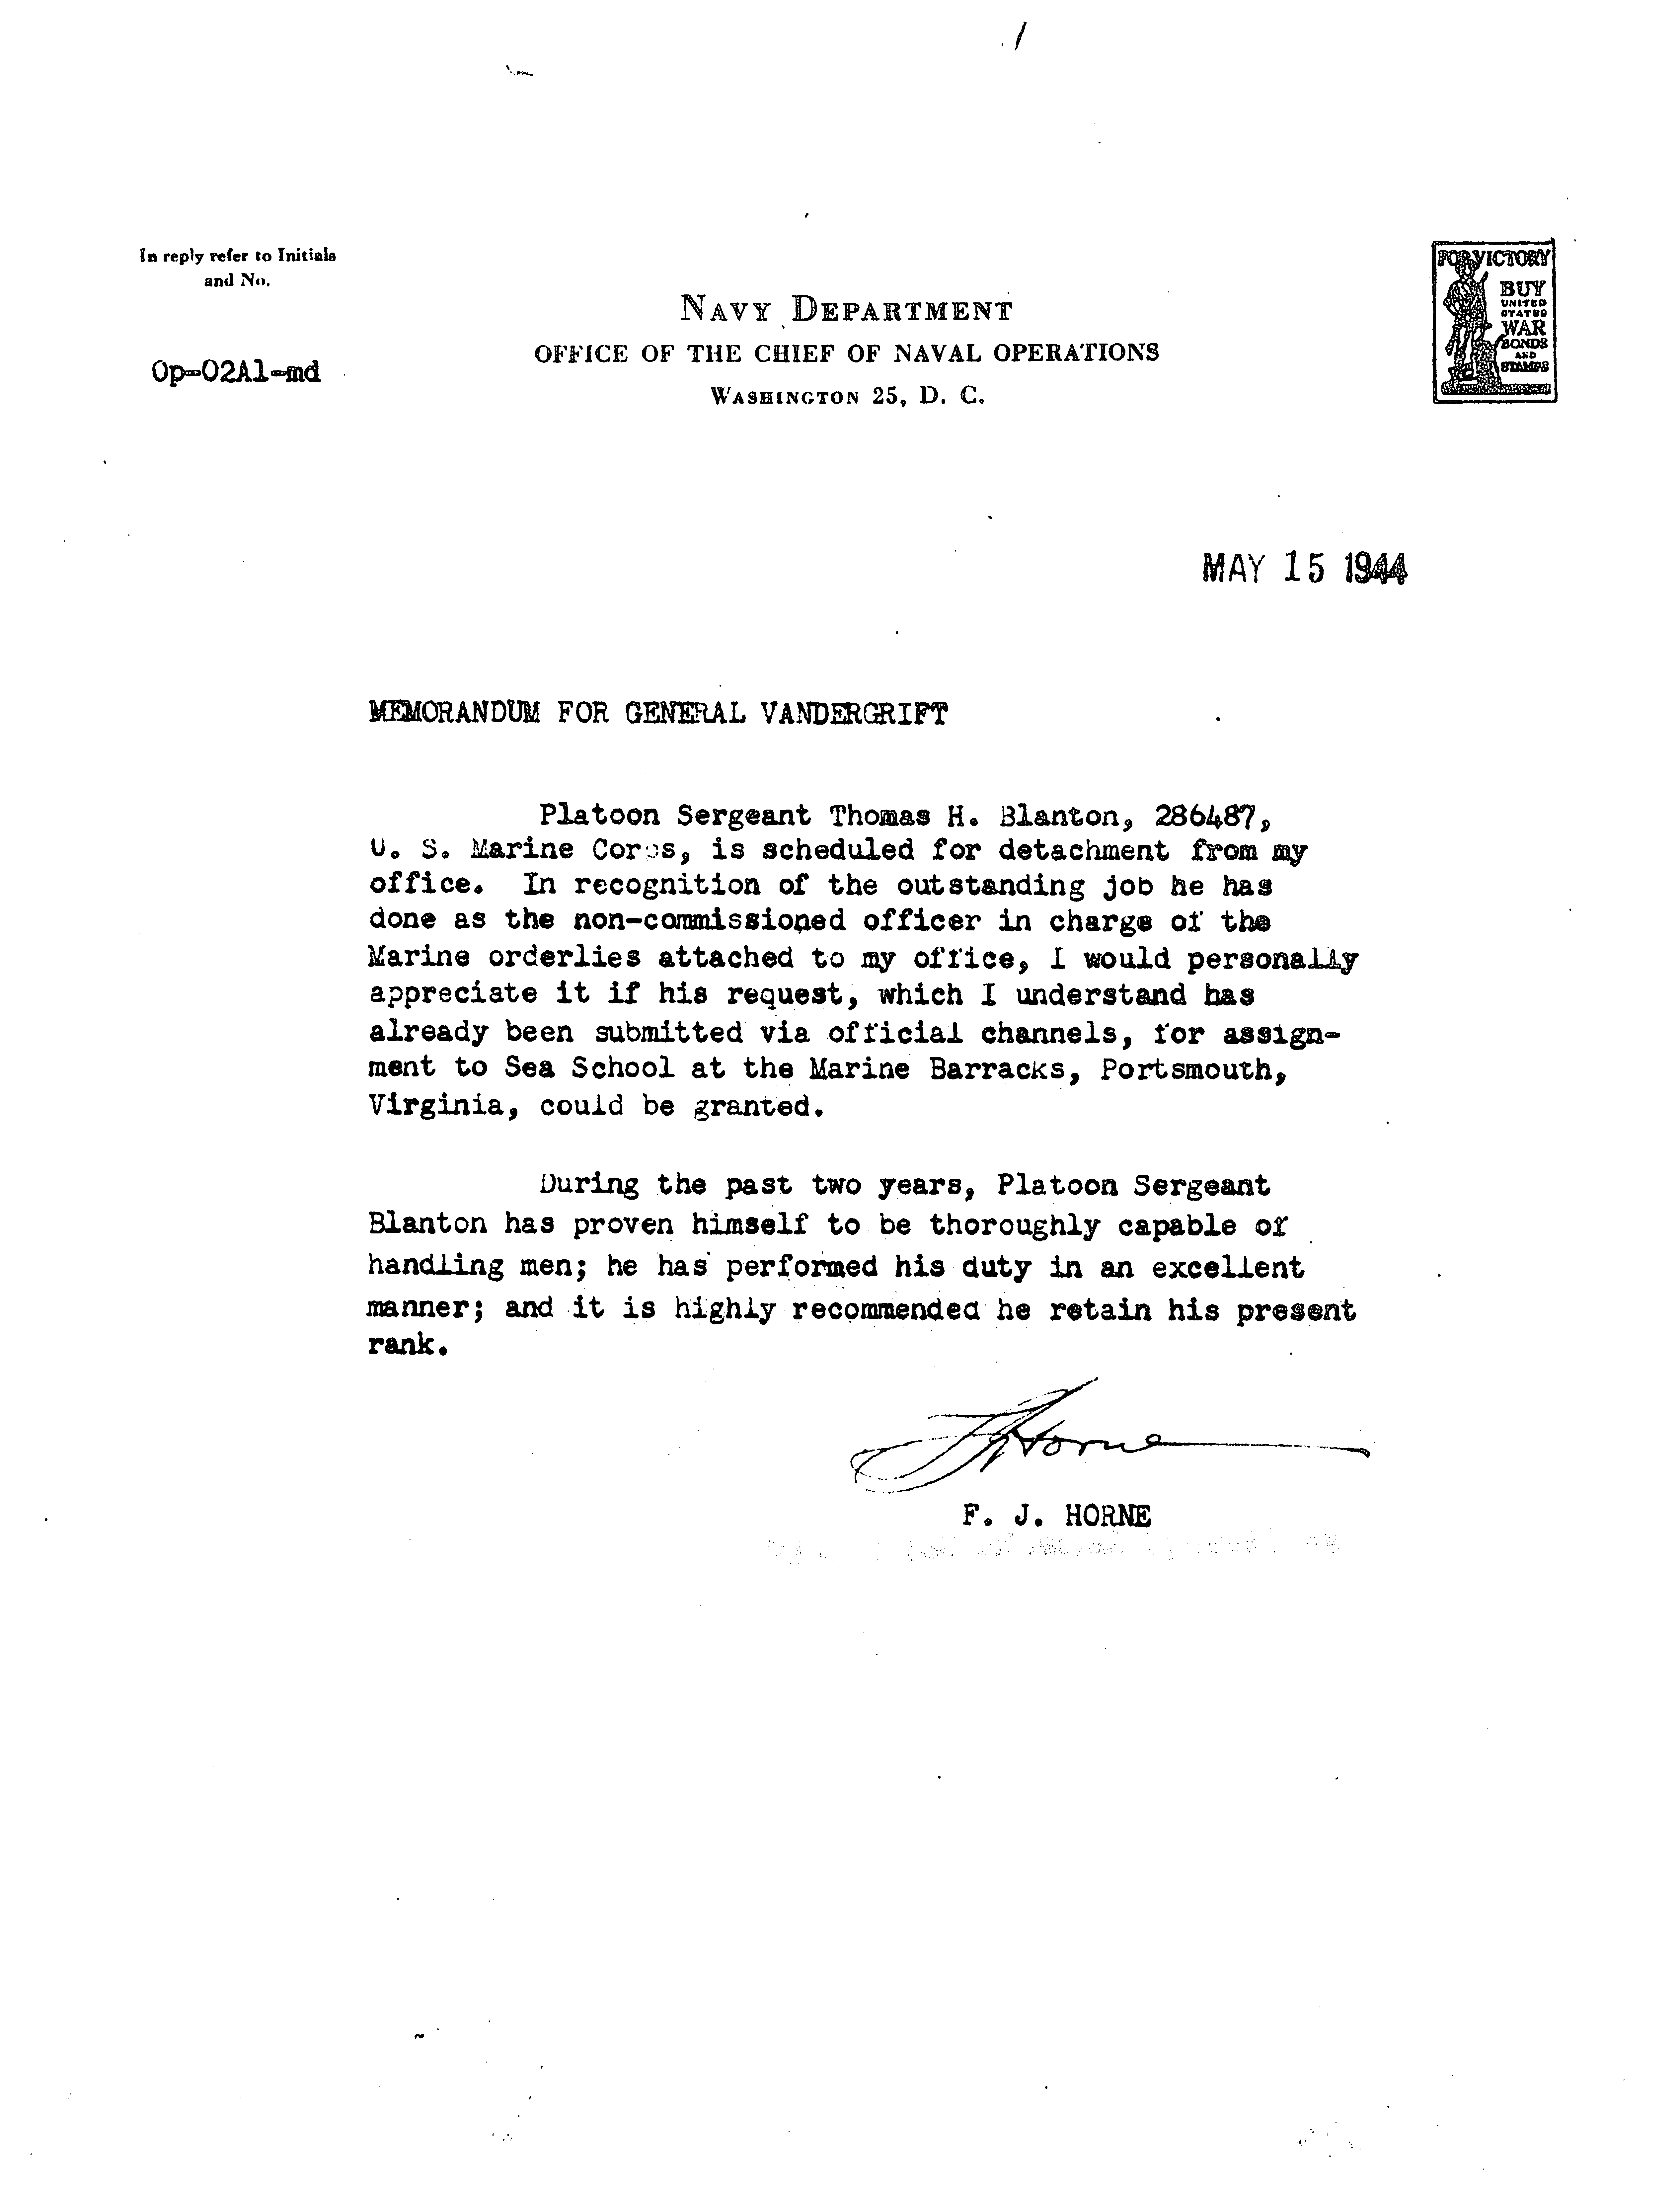 Admiral Horne's Letter of Recommendation